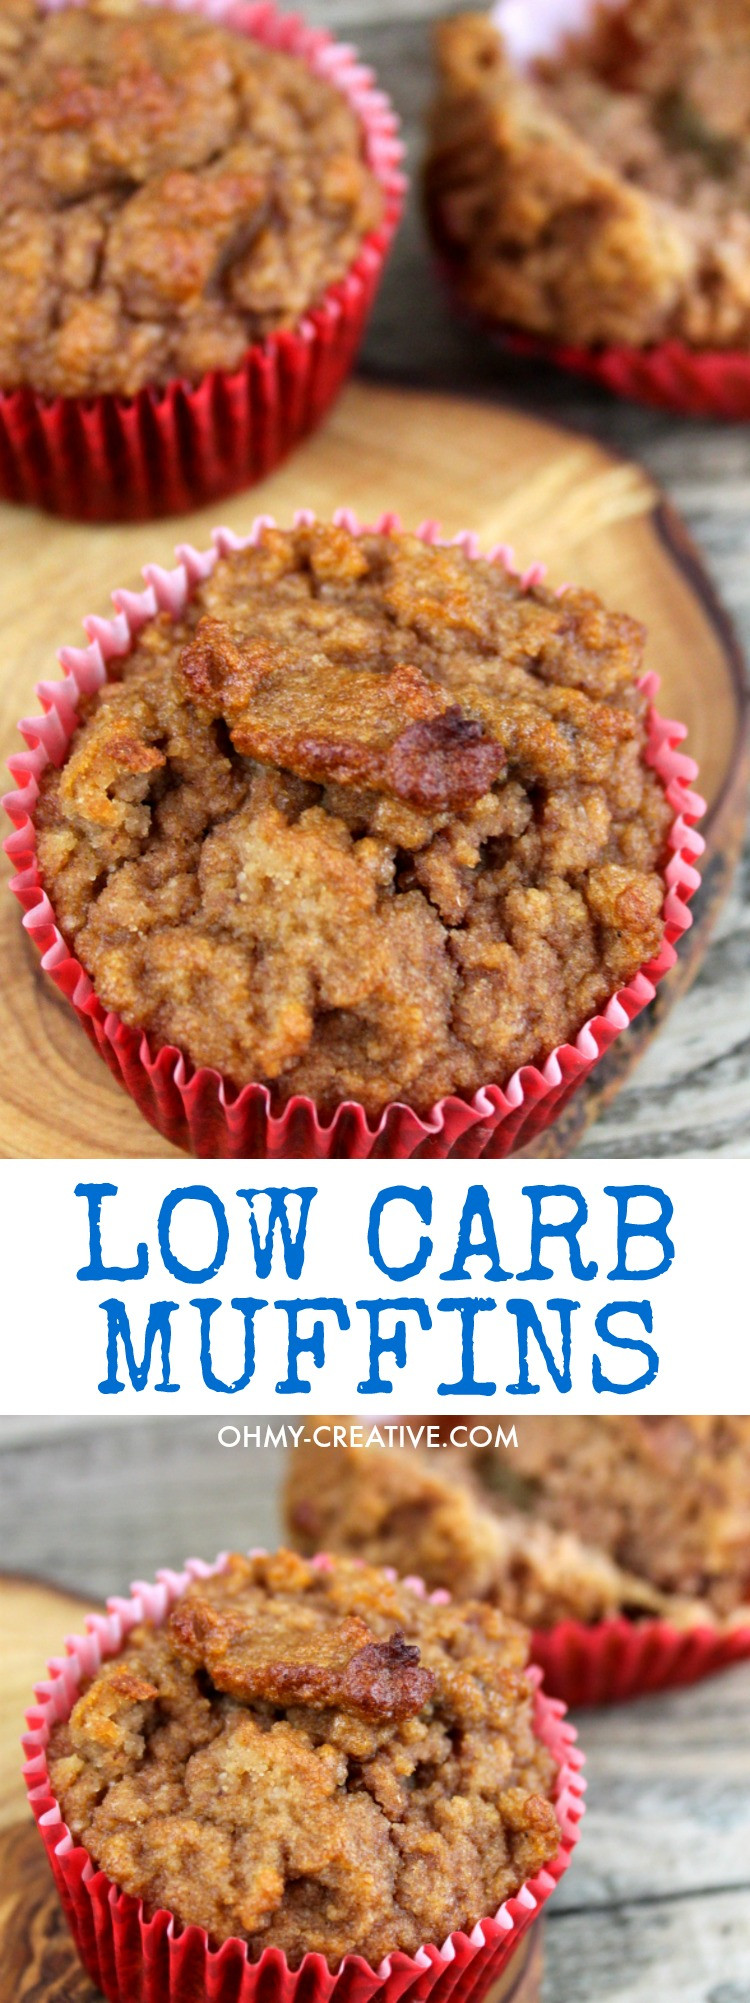 Low Carb Bread Almond Flour Muffin Recipes
 Low Carb Muffins Oh My Creative